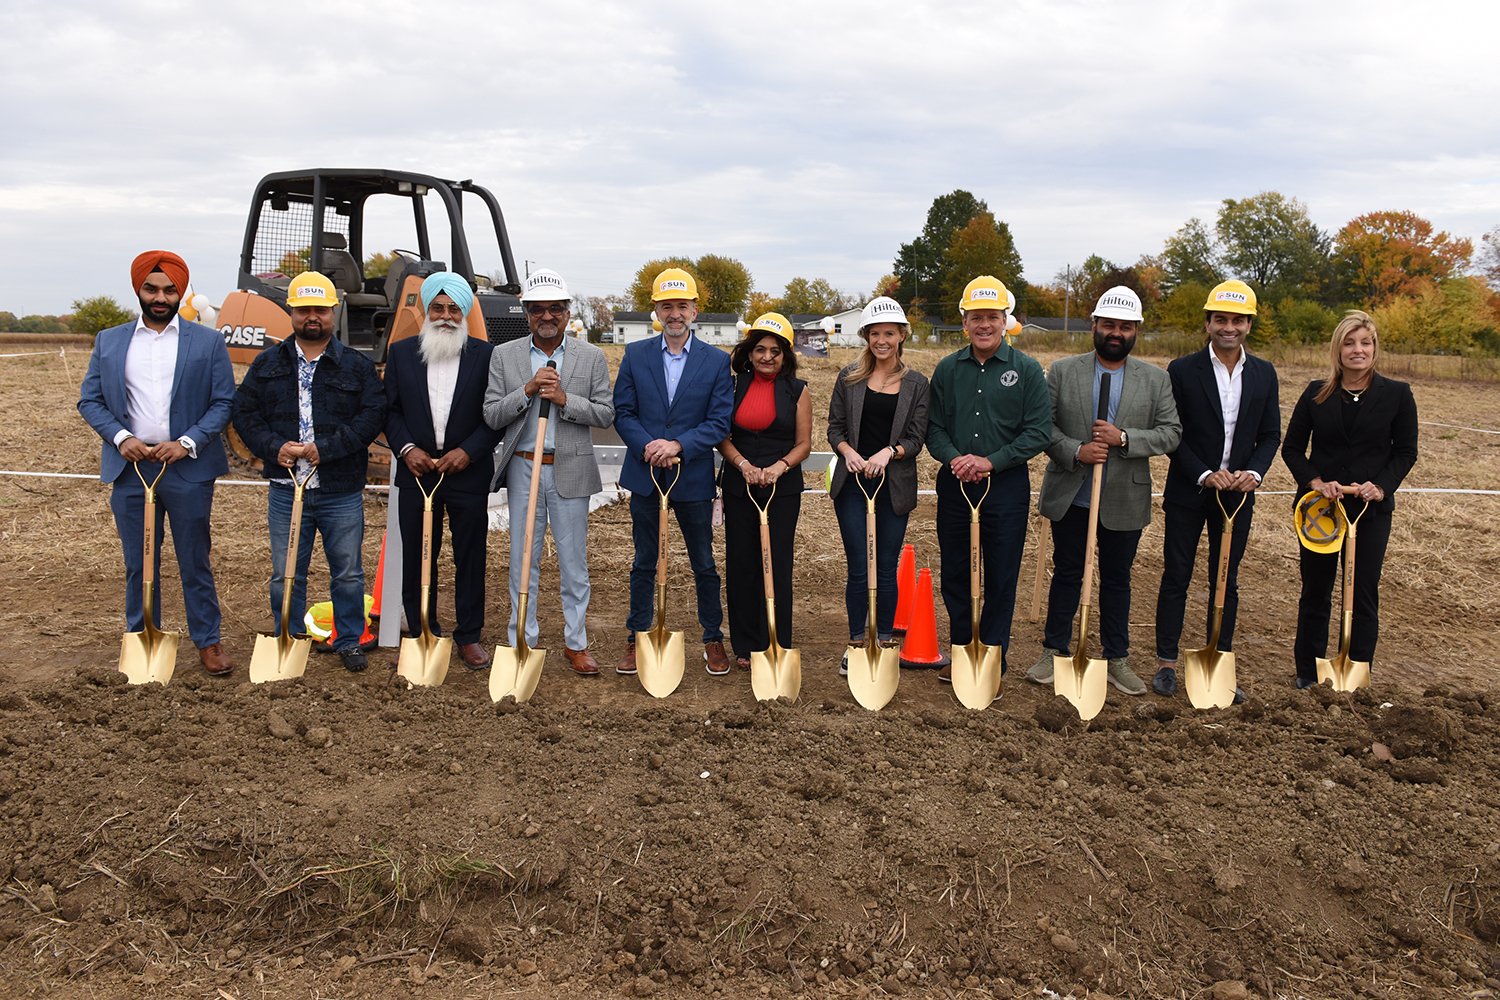 Hilton held the groundbreaking for its first H3 extended-stay hotel in Indiana last week